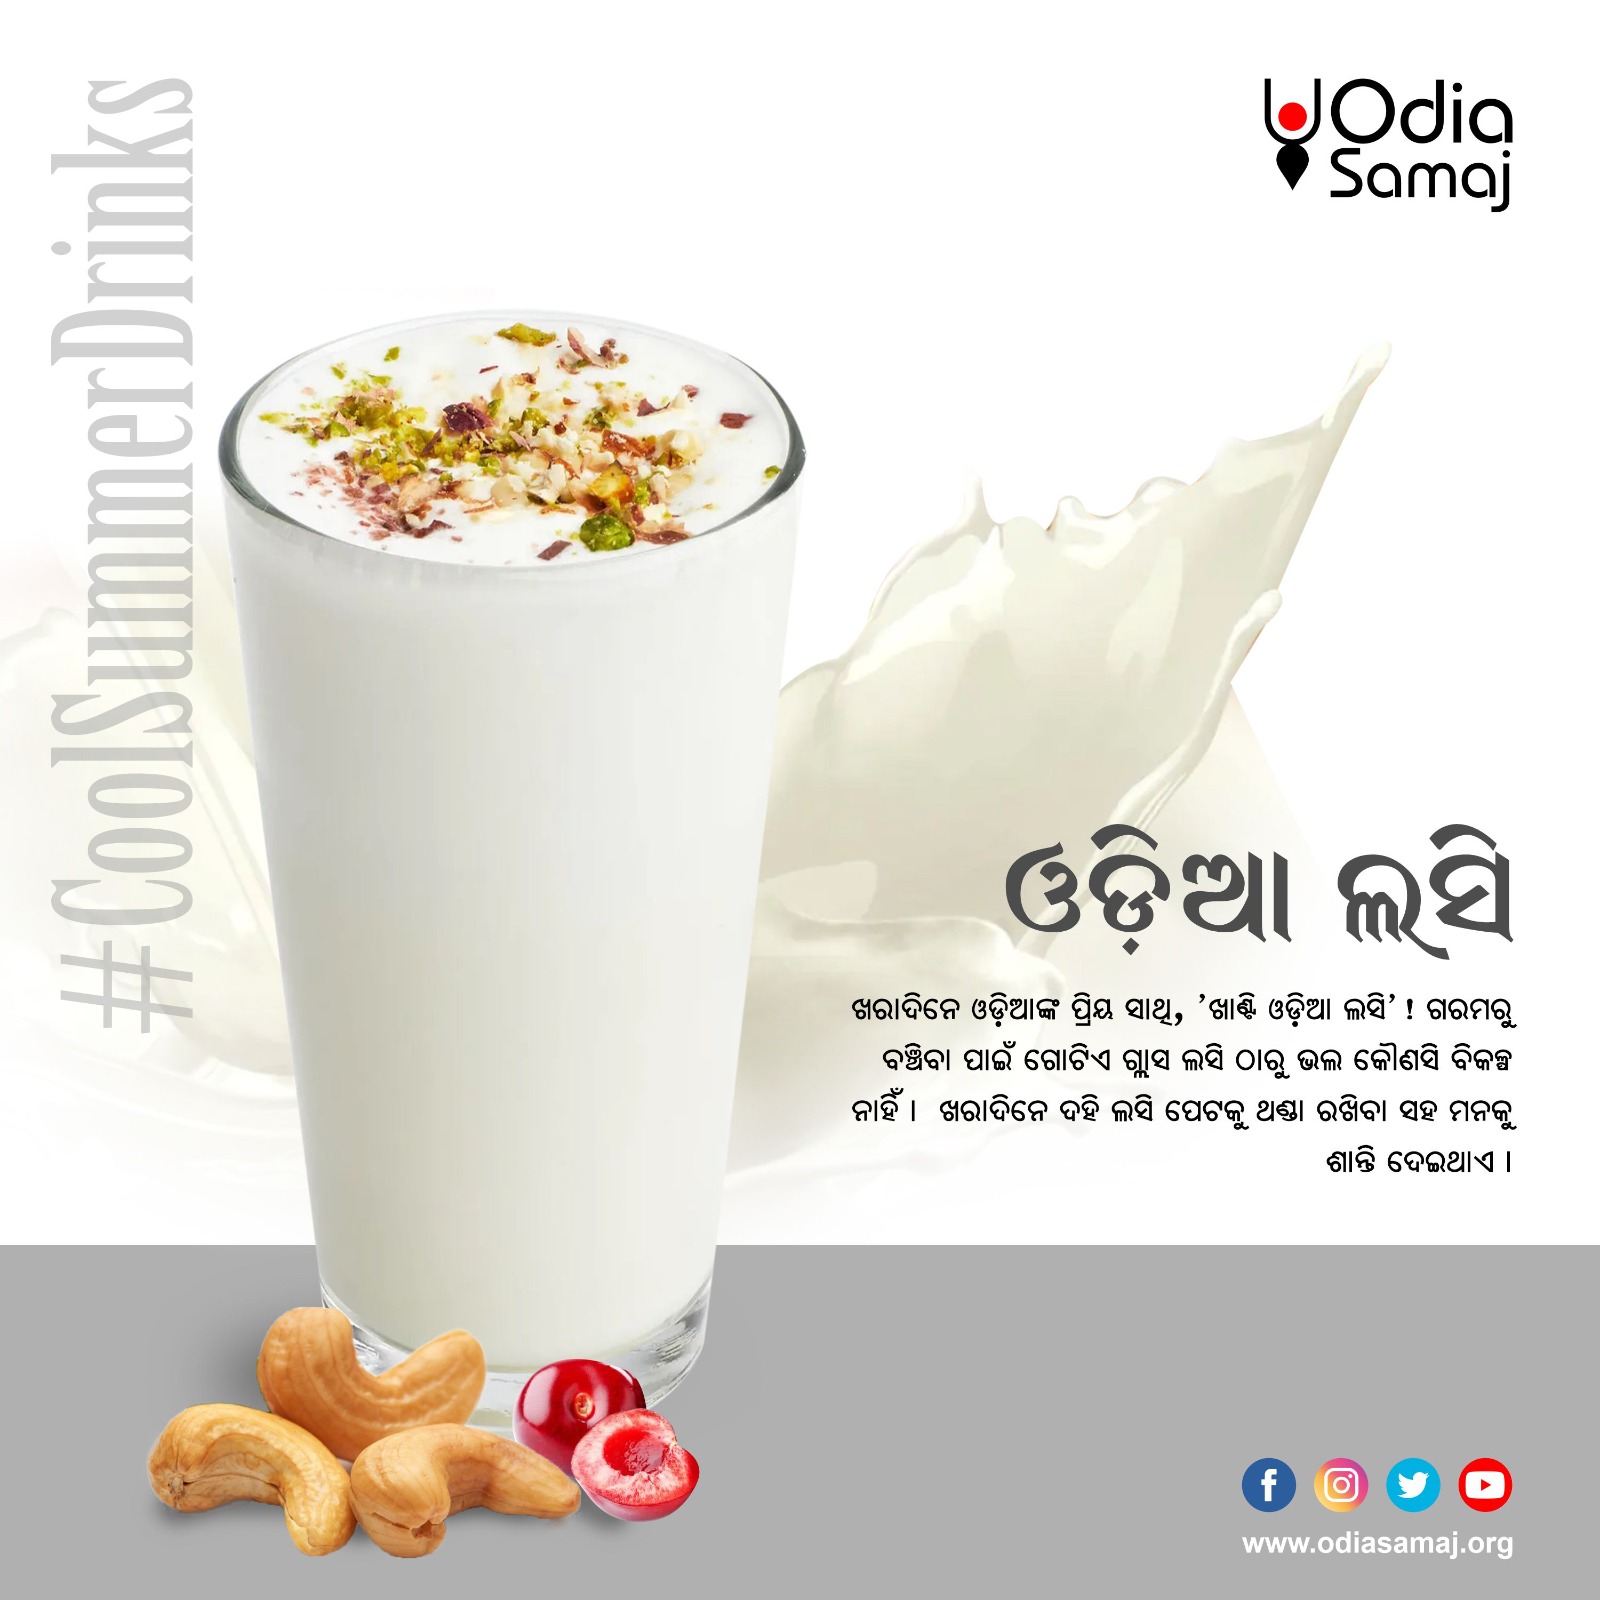 Every Odia's favourite drink in the summer is tasty lassi.